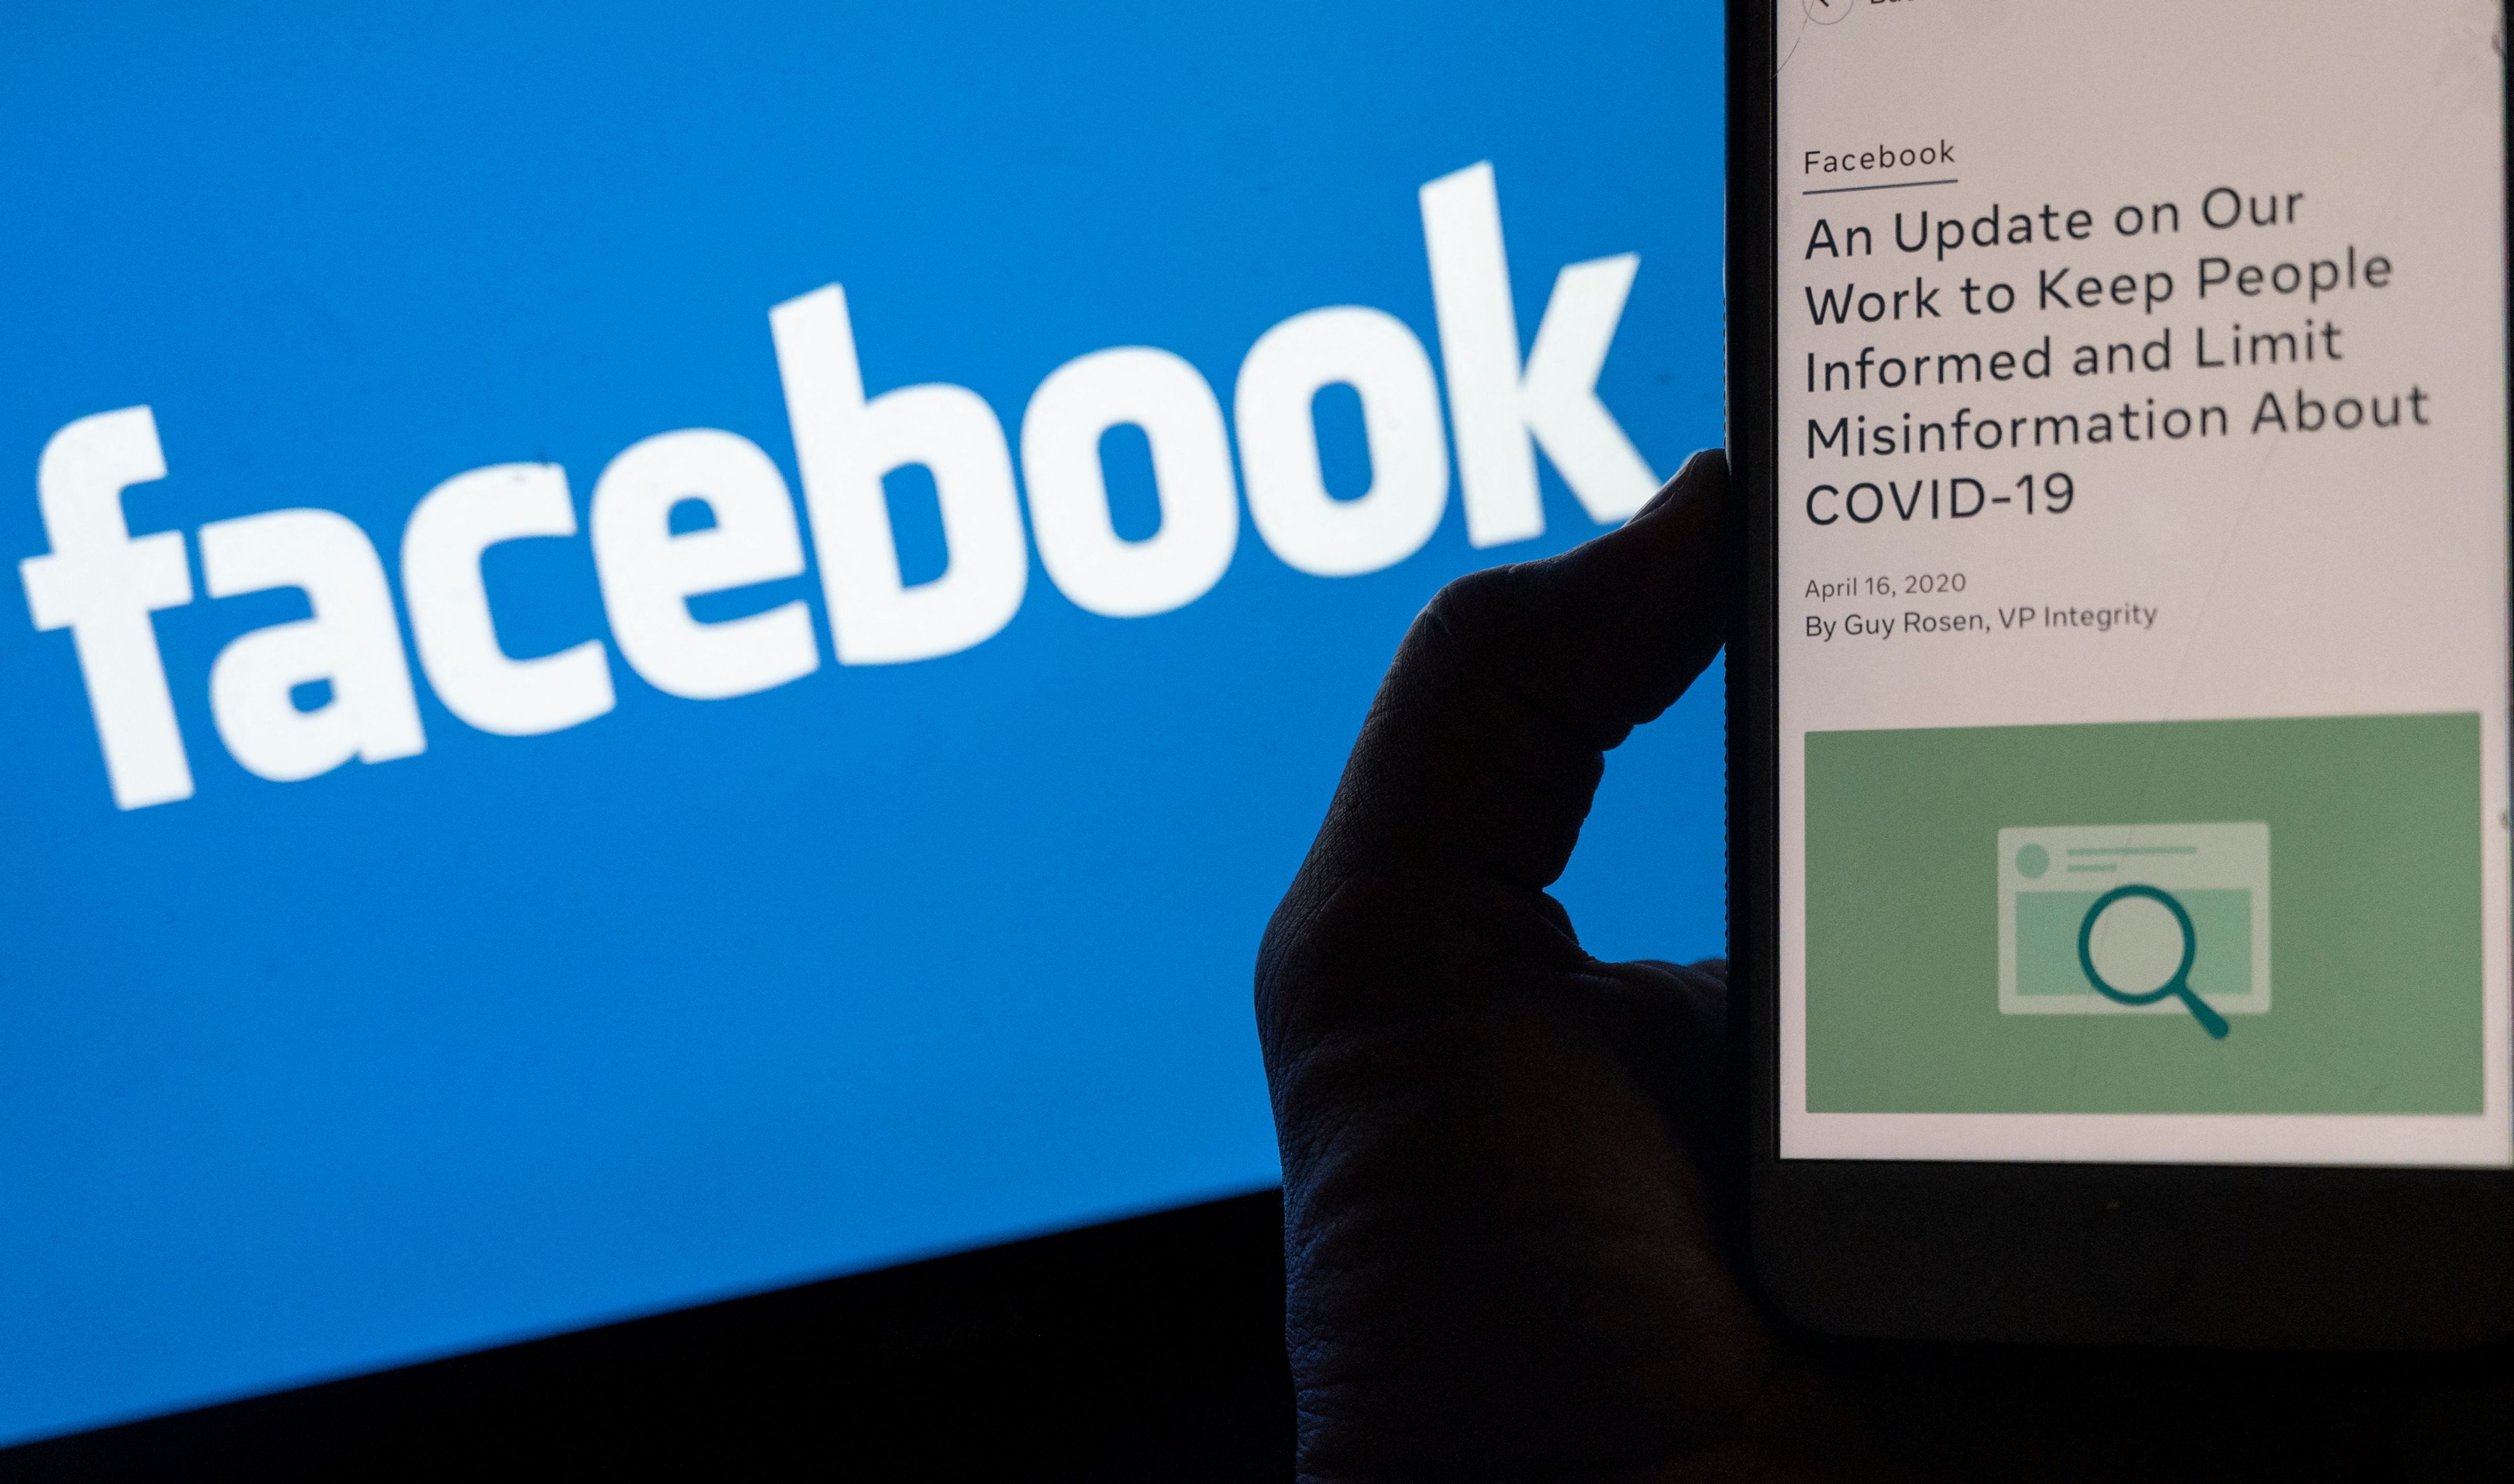 Smart phone screen displays a new policy on Covid-19 misinformation with a Facebook website in the background